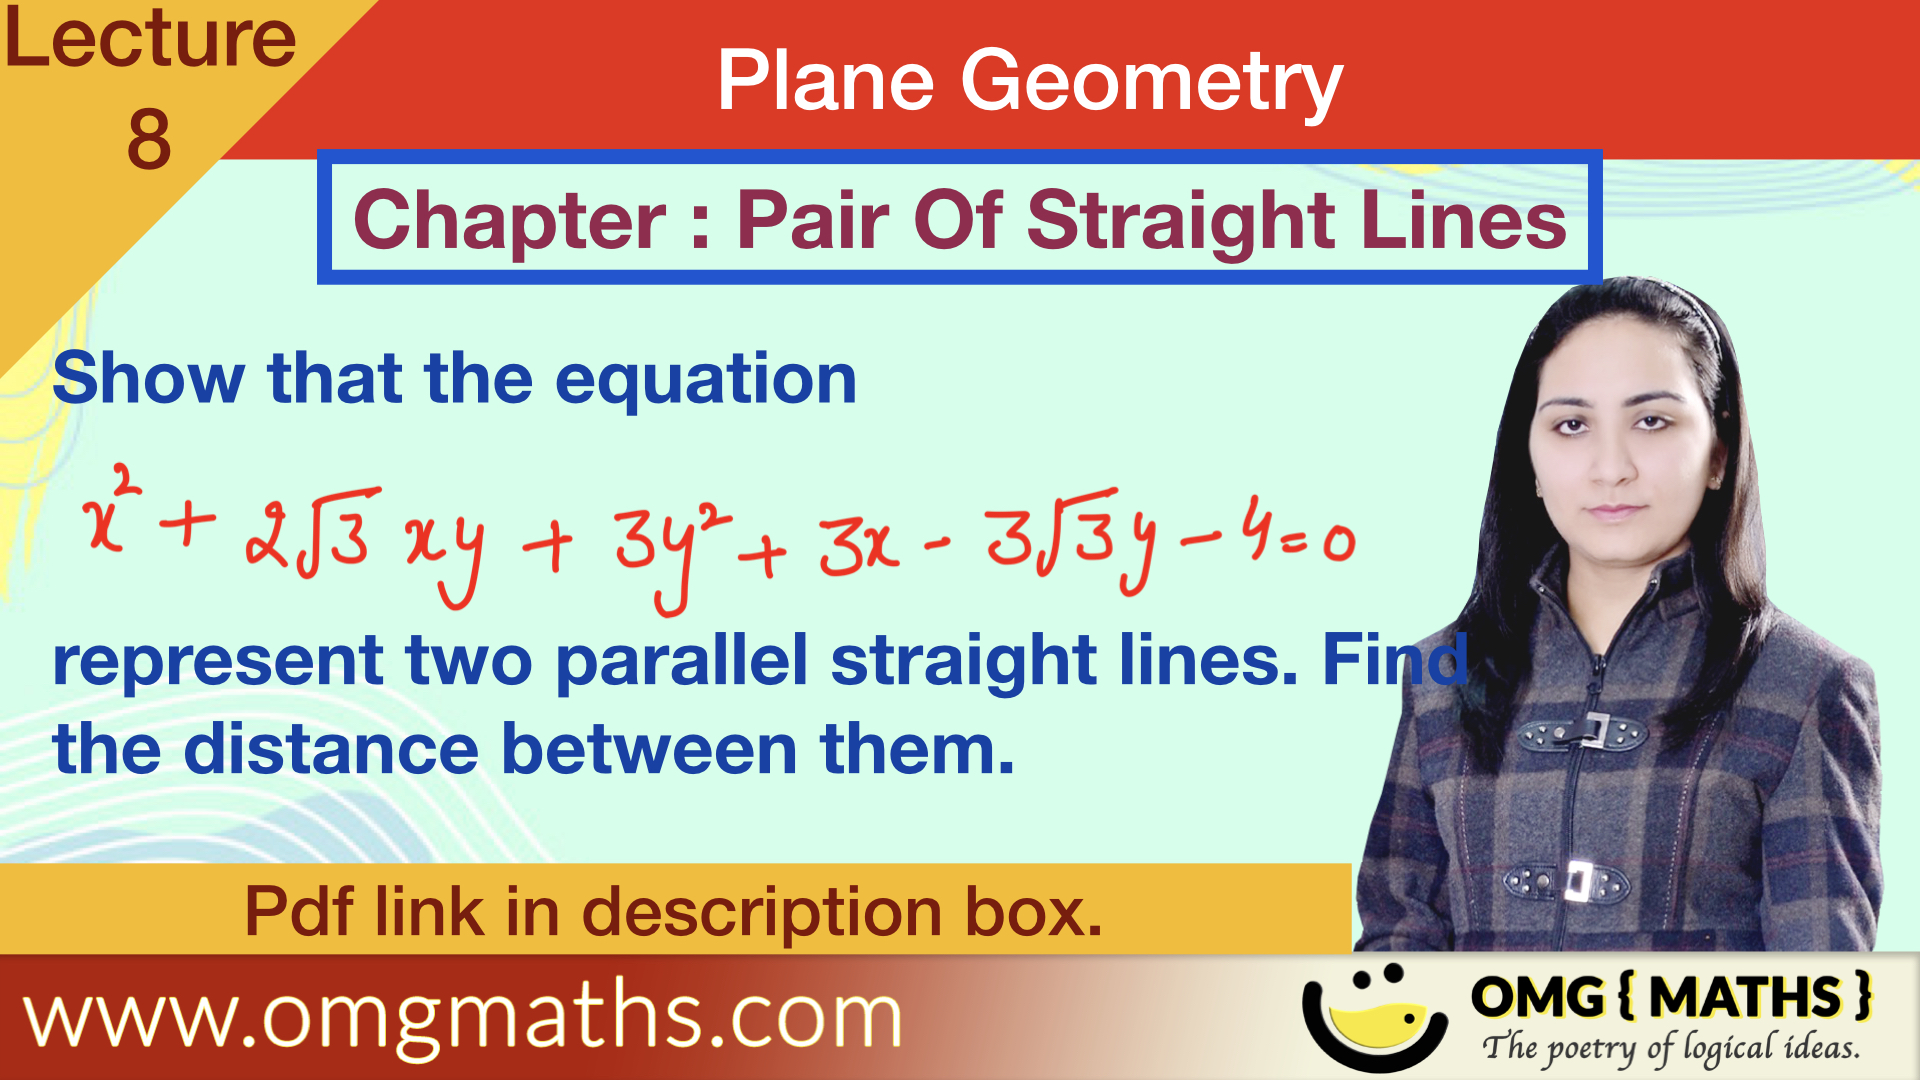 Pair Of Straight Lines | Example | Plane Geometry | Bsc